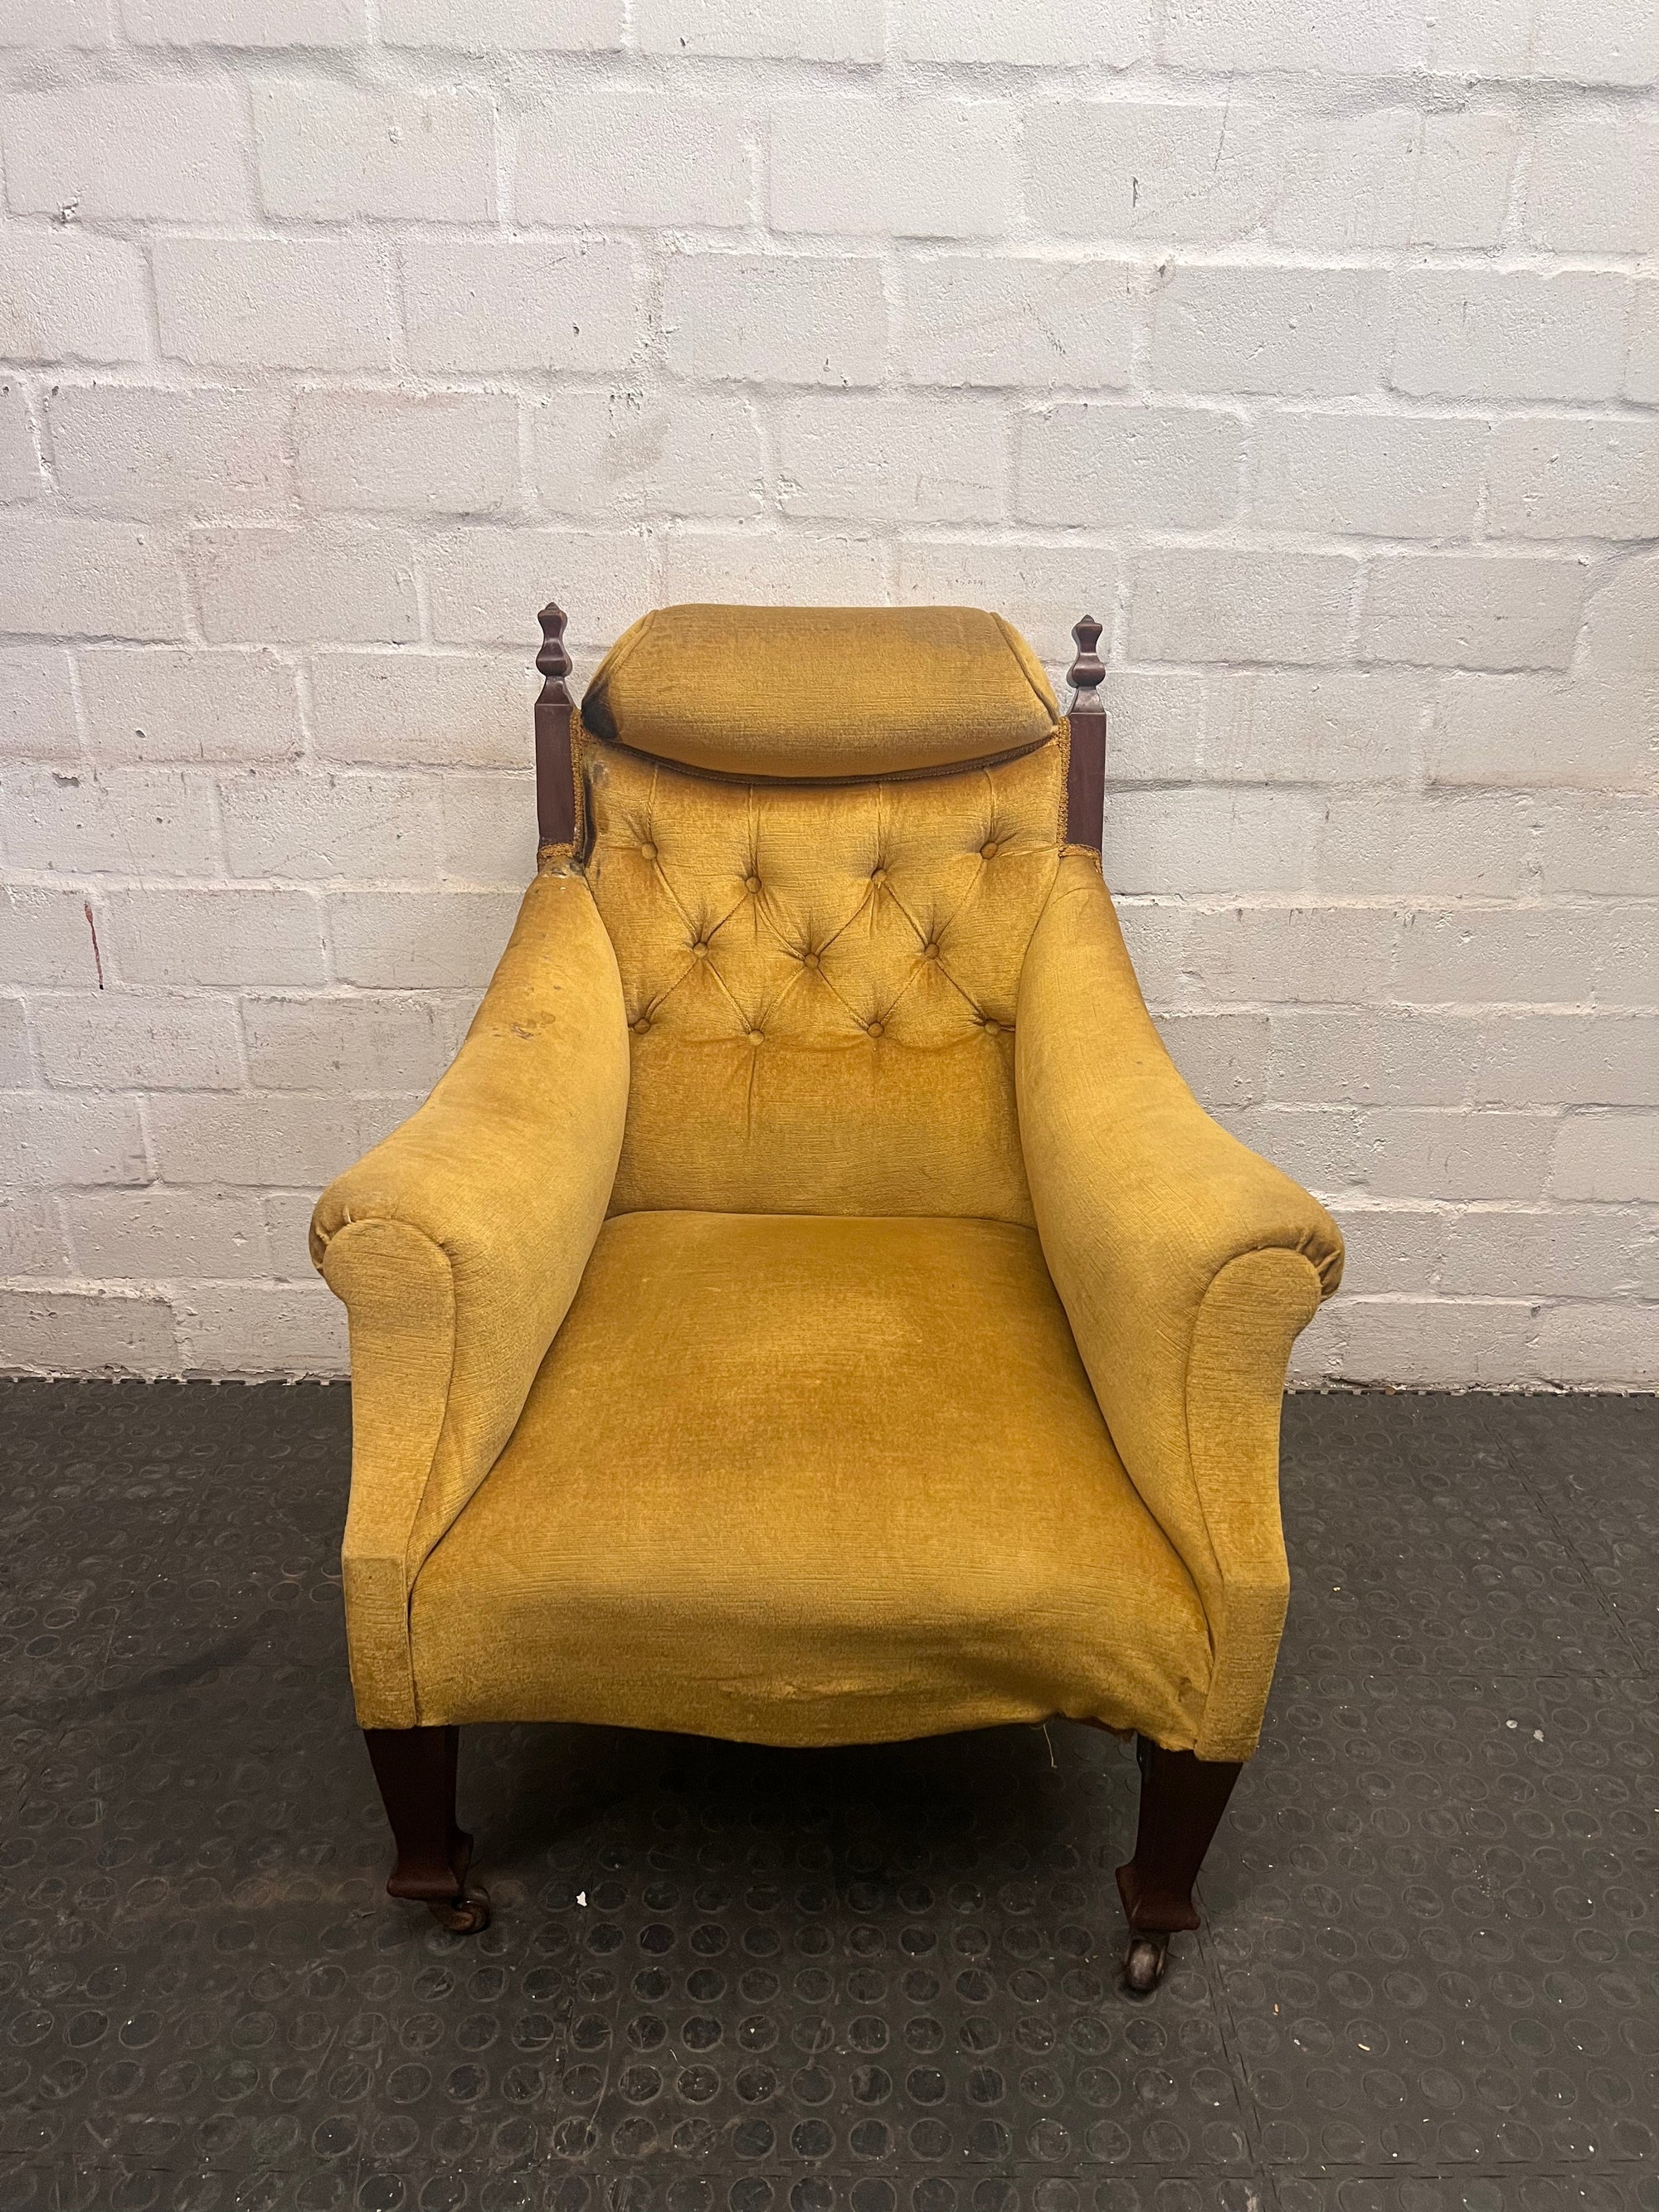 Mustard Velvet Wood Caved Arm Chair - Fabric and Leg Damage - REDUCED